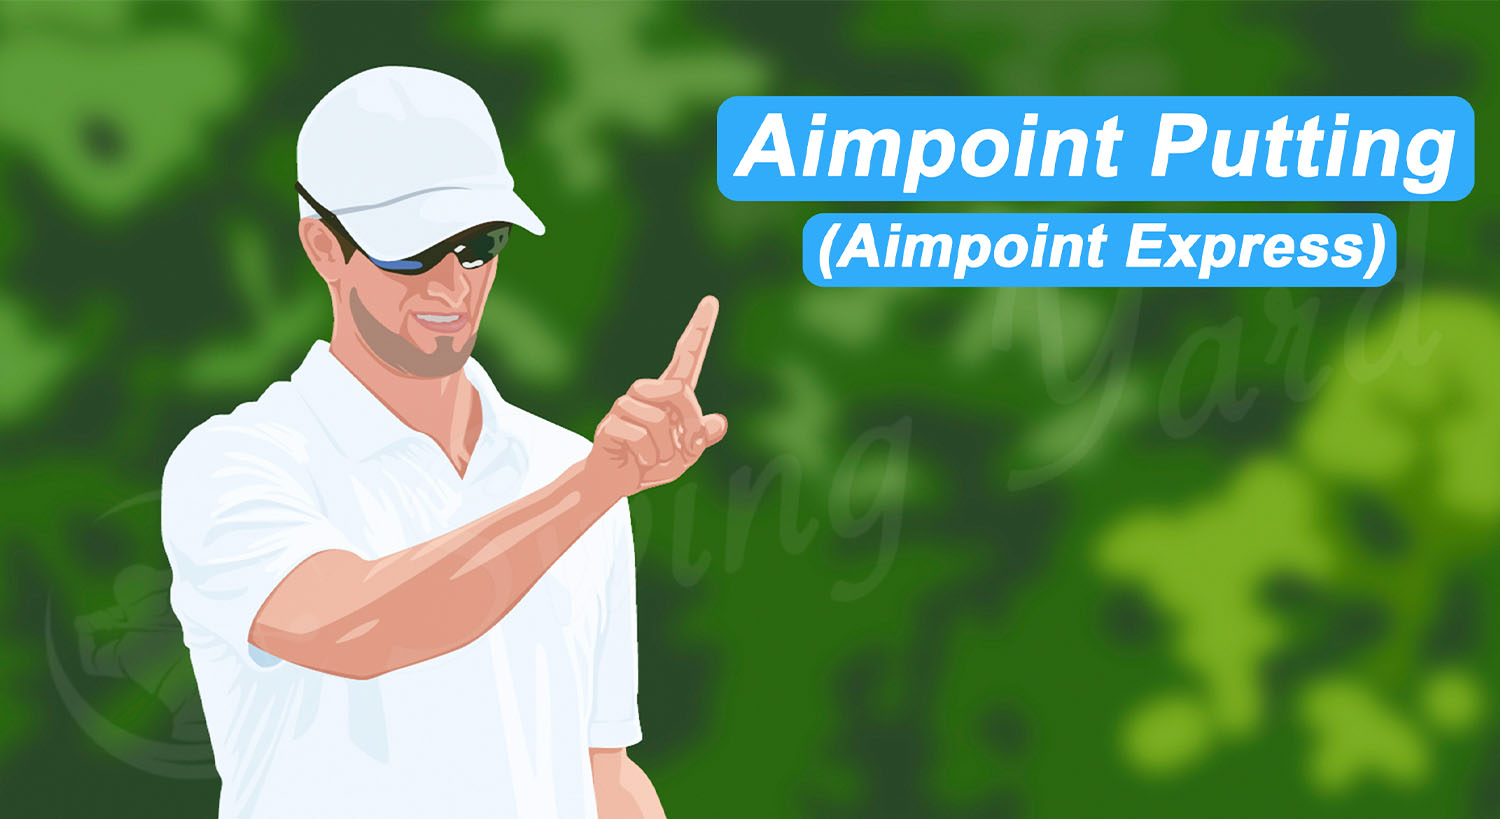 guy holding up hand doing aimpoint express putting